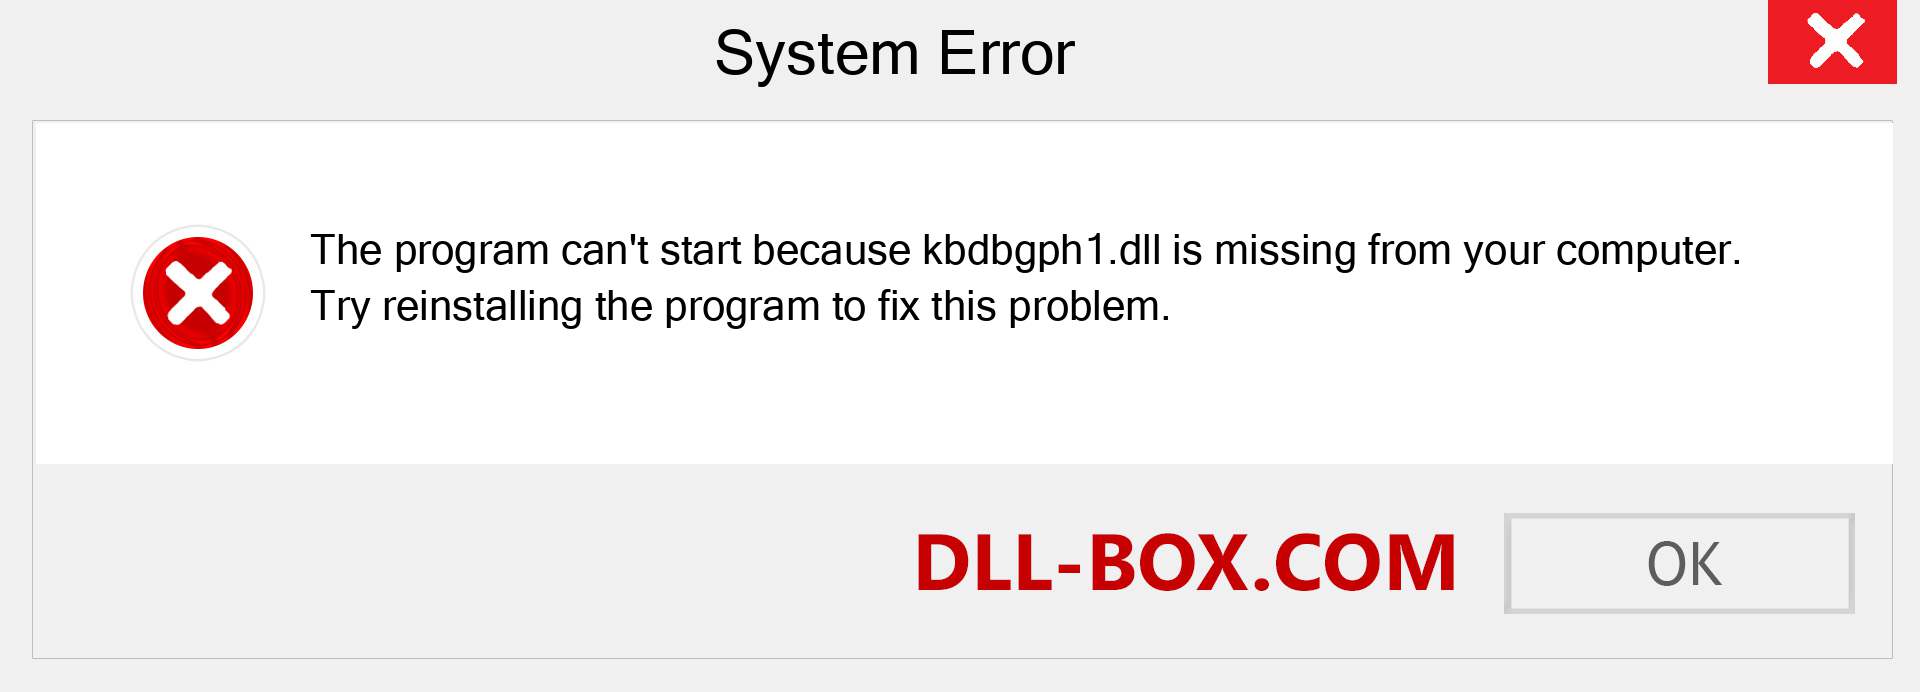  kbdbgph1.dll file is missing?. Download for Windows 7, 8, 10 - Fix  kbdbgph1 dll Missing Error on Windows, photos, images